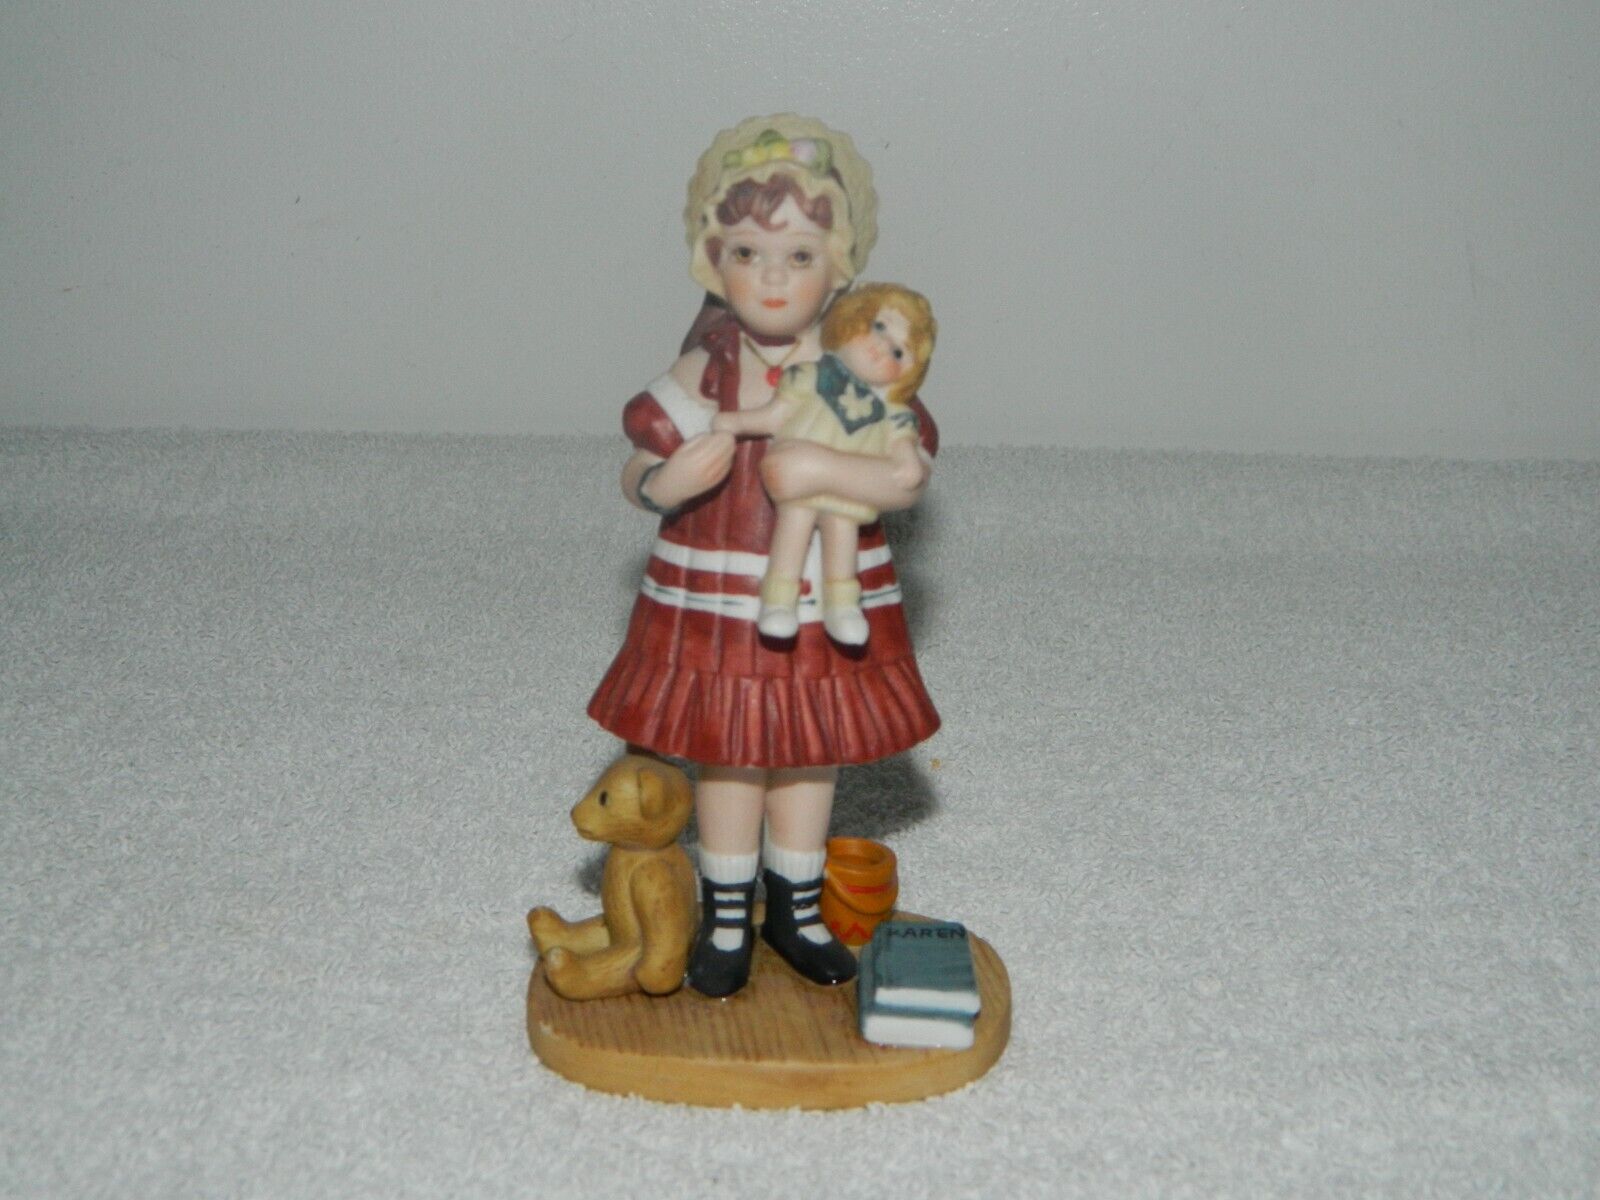 Jan Hagara Figurine Lydia and Shirley Temple Doll Limited Edition #5175 Signed